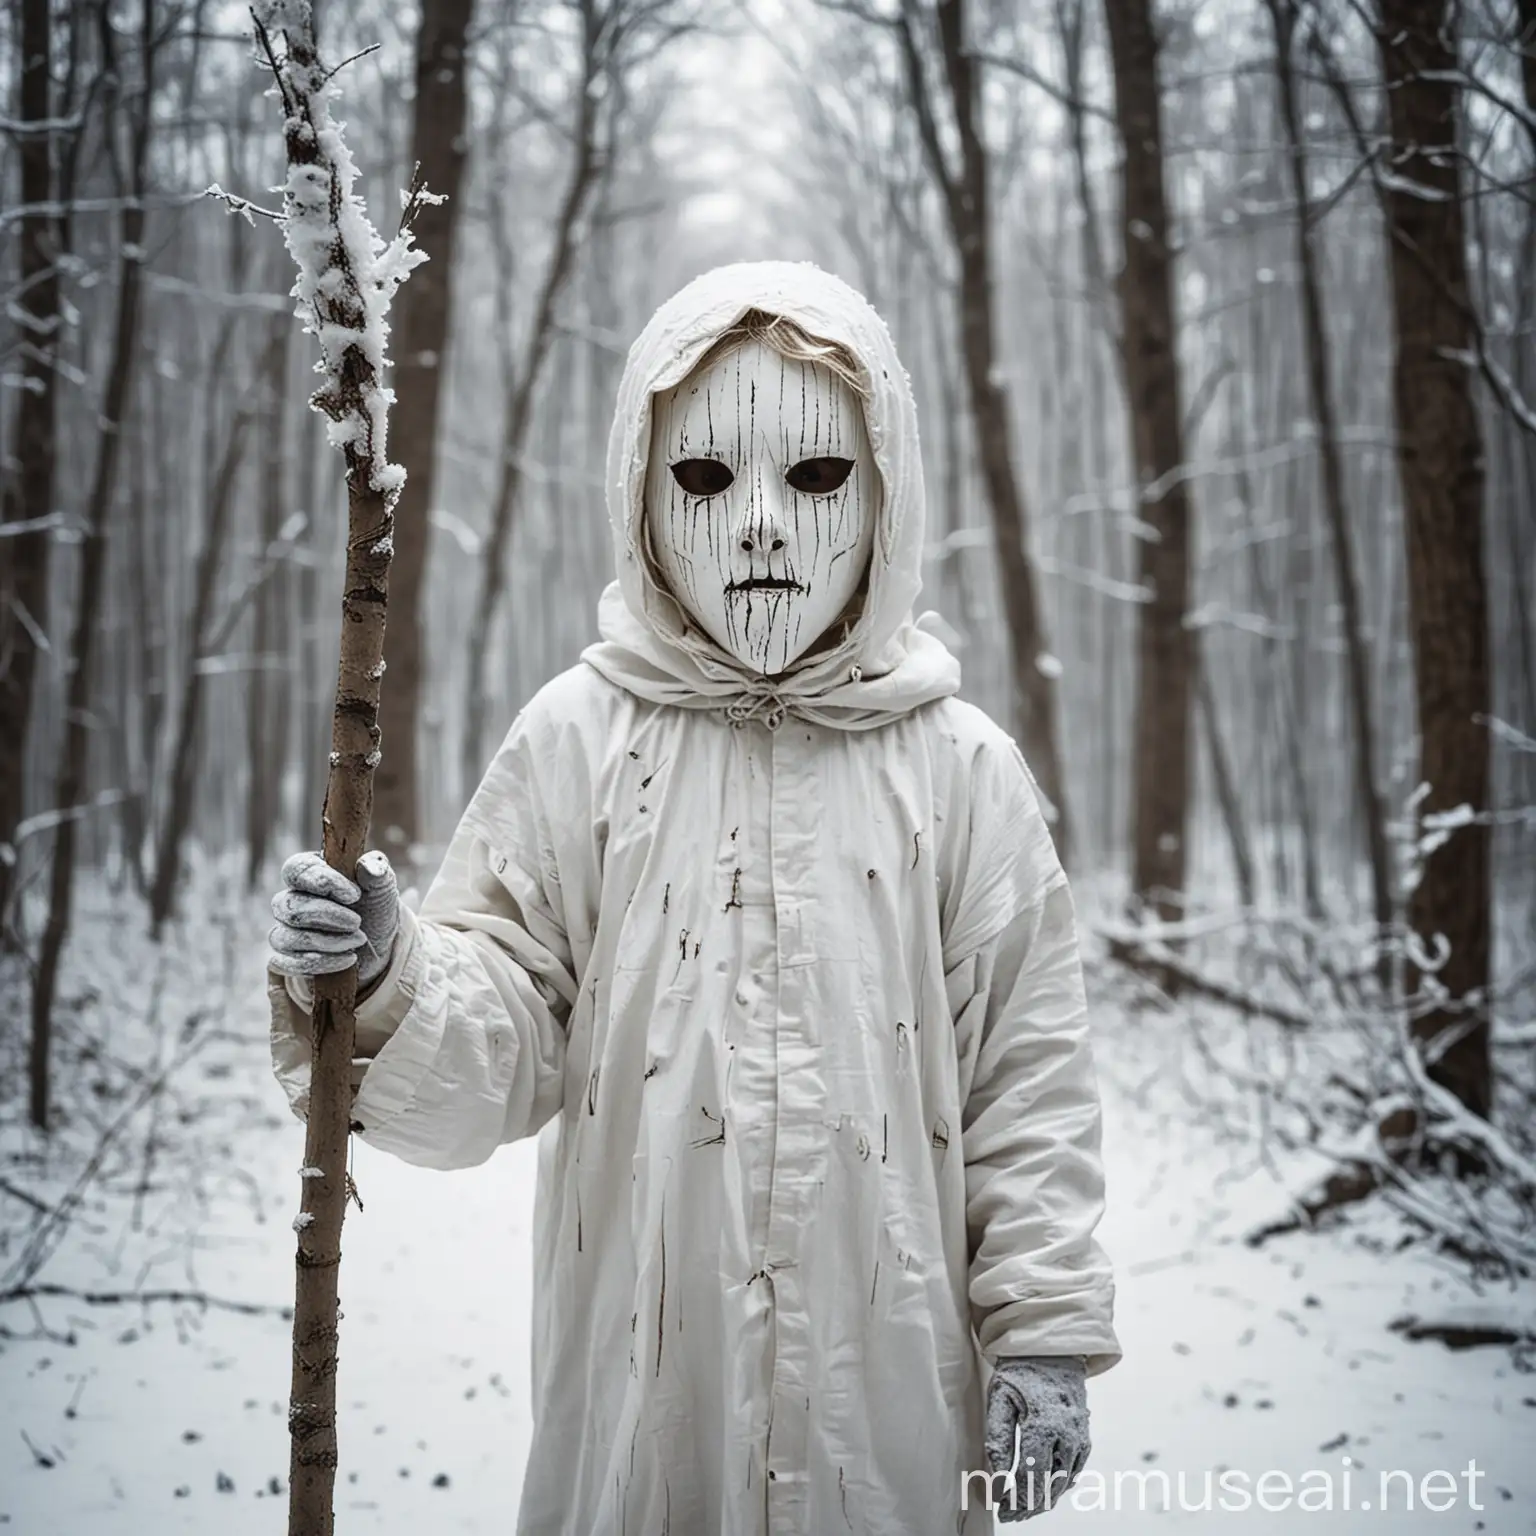 Mysterious Child in Winter Forest with Creepy White Mask and Stick